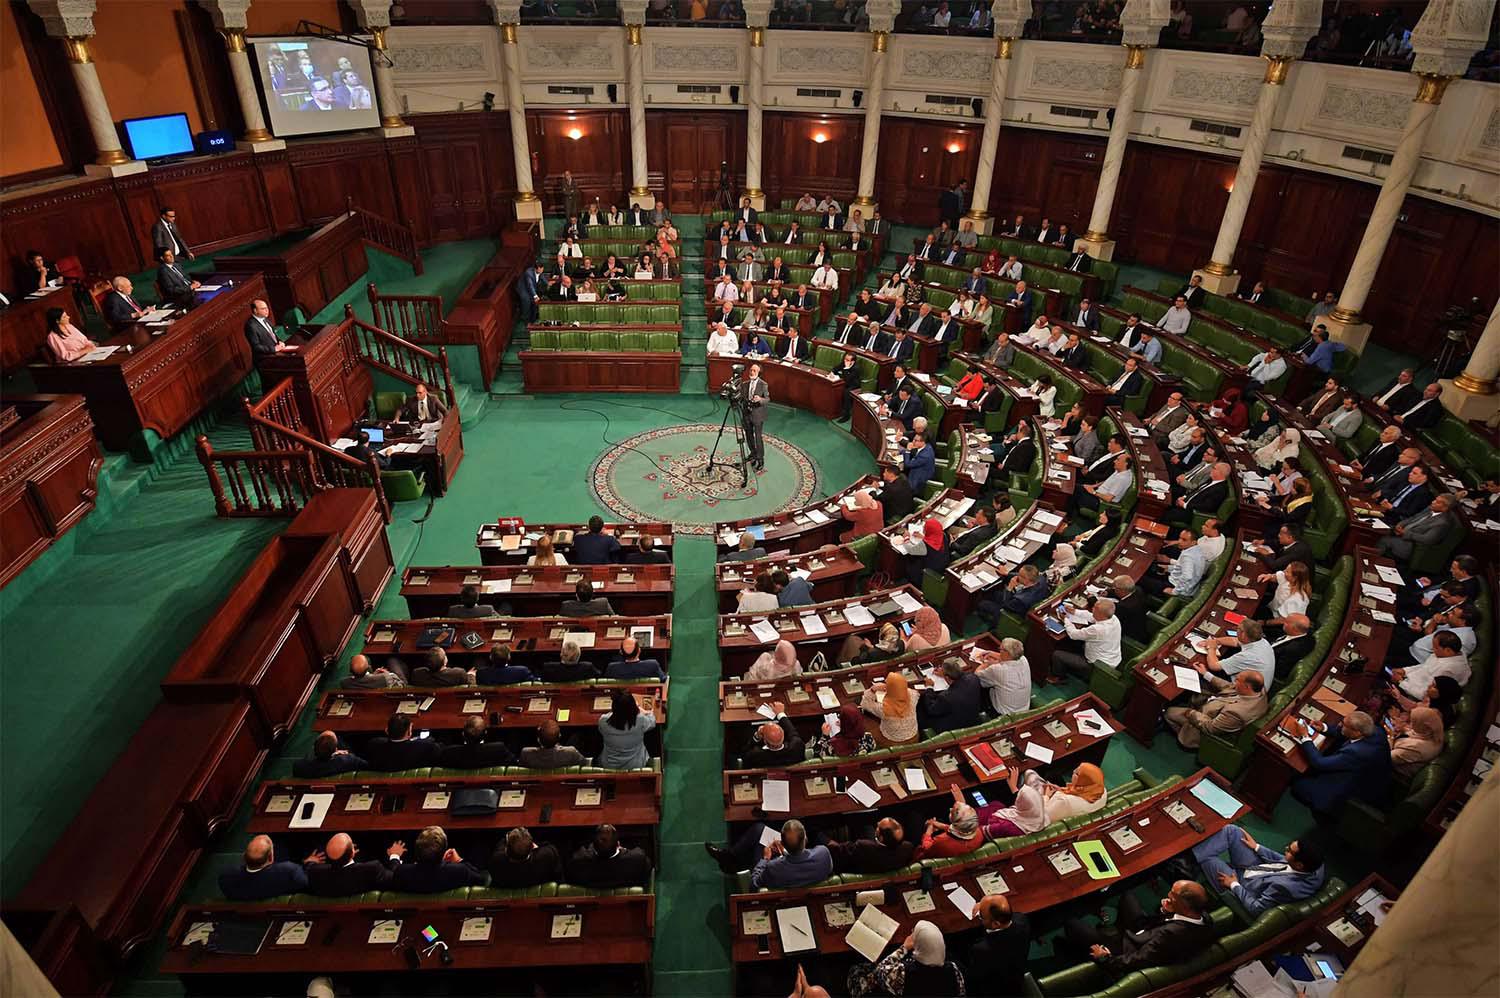 The wrangle between liberals and Islamists at Tunisia's parliament heats up